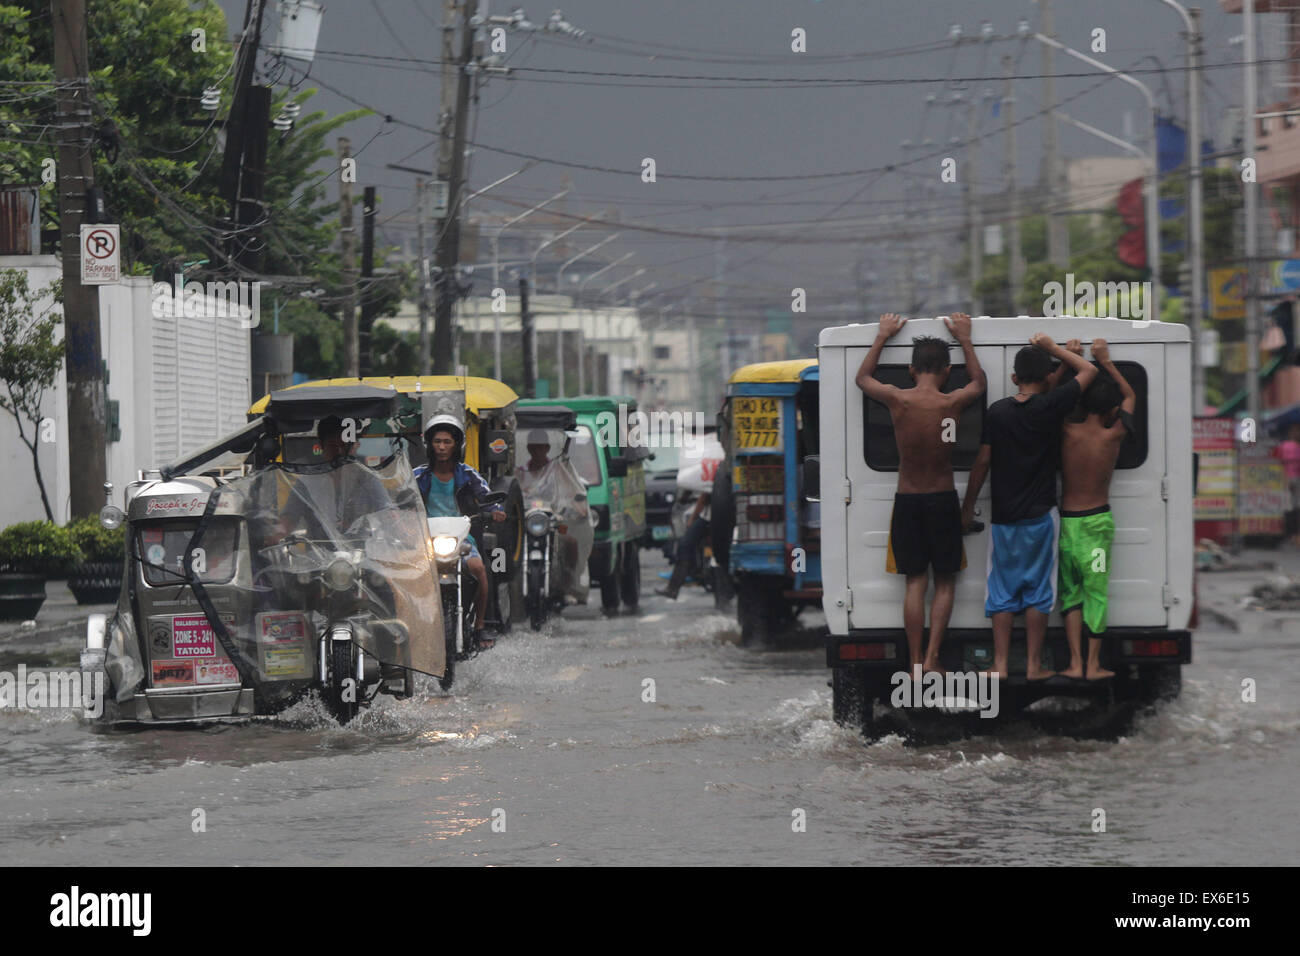 Malabon City, Philippines. 8th July, 2015. Residents wade through a flooded street in Malabon City, the Philippines, July 8, 2015. Typhoon Chan-hom (local name Falcon) with maximum sustained winds of 130 kph near the center and gustiness of up to 160 kph brought heavy rain, strong winds, lightning and floods in northern Philippines, causing school and office suspensions, and cancellations in air and sea travel. Credit:  Rouelle Umali/Xinhua/Alamy Live News Stock Photo